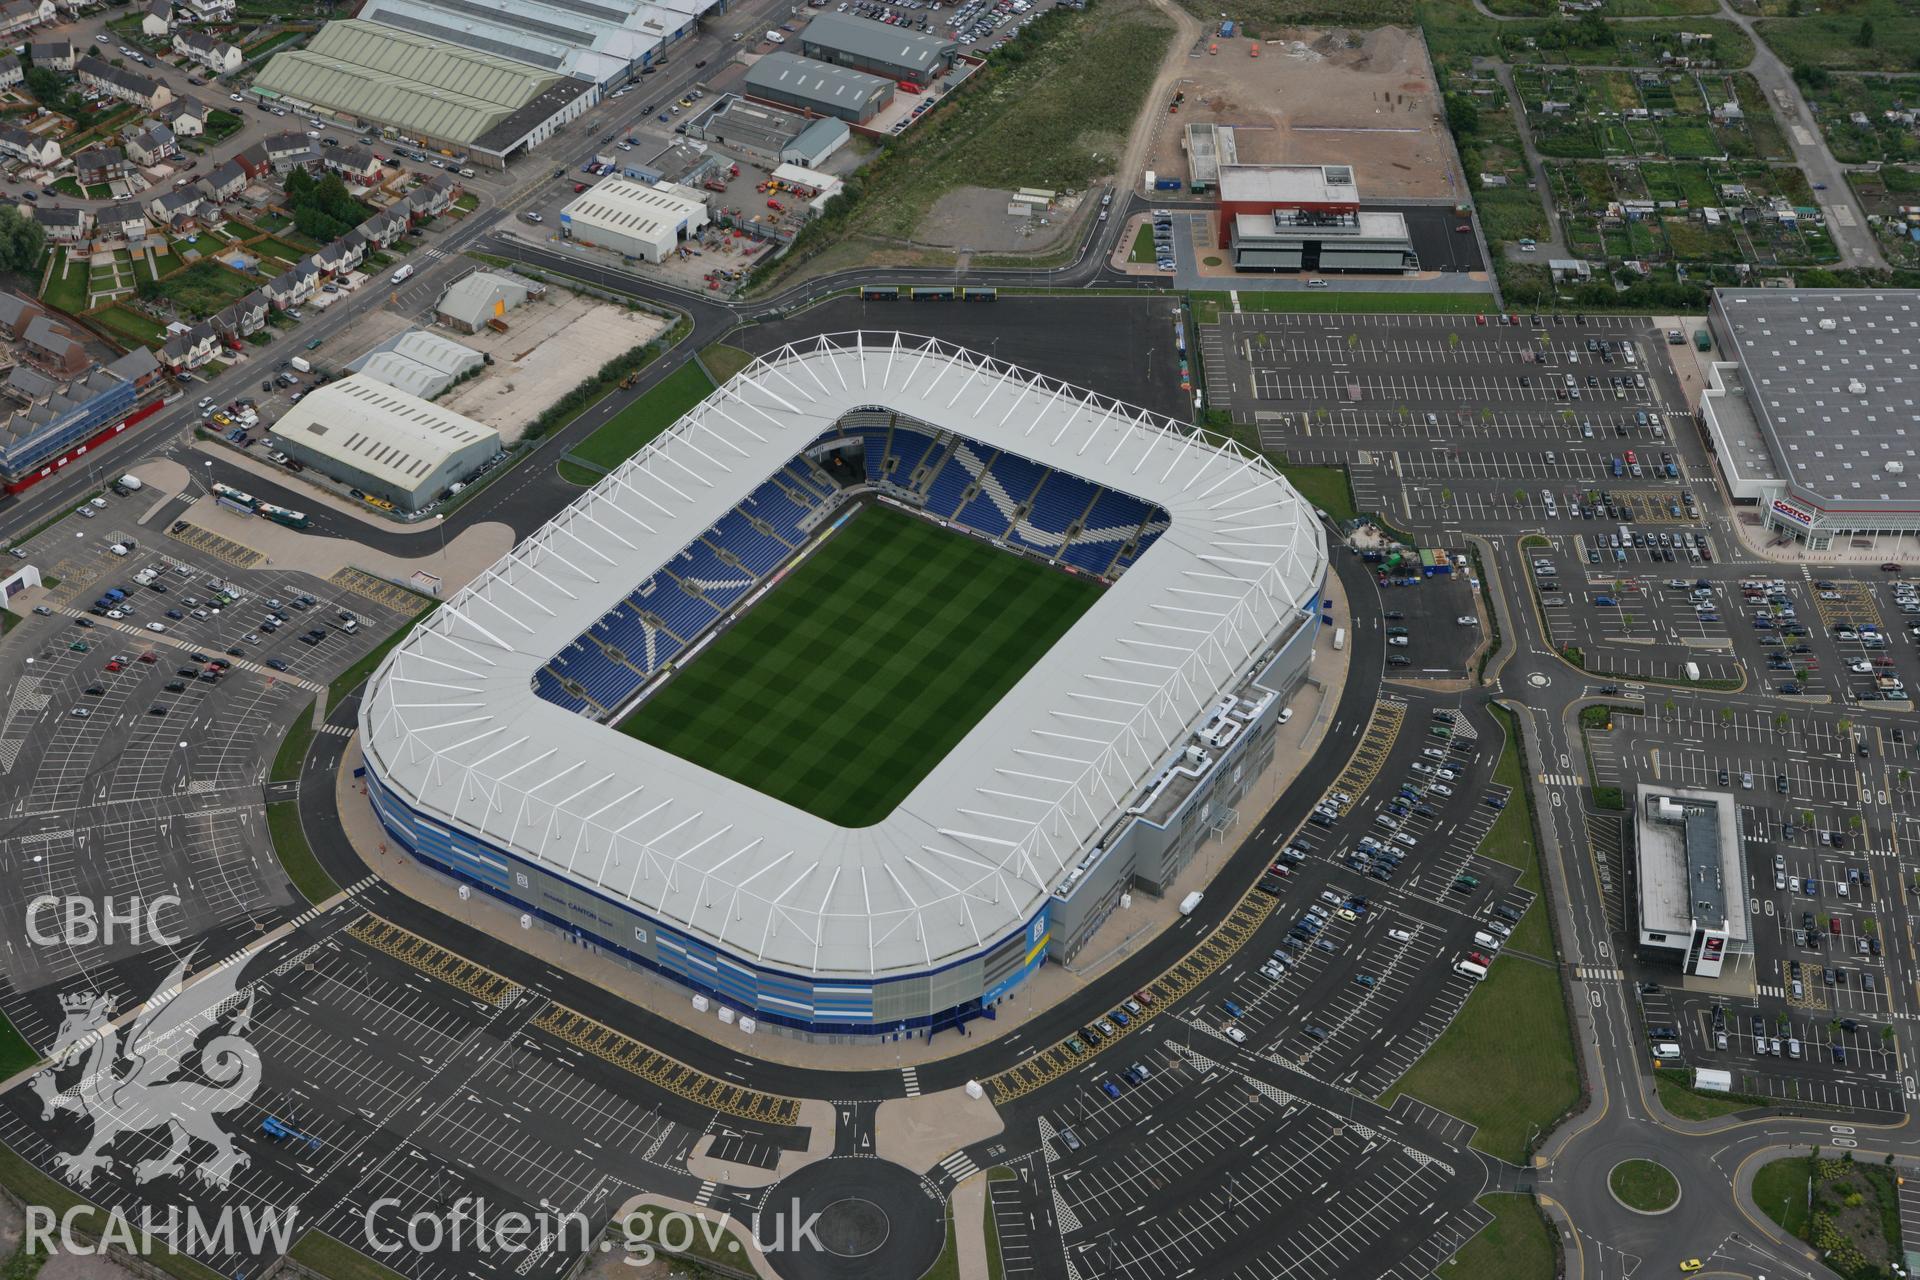 RCAHMW colour oblique photograph of Cardiff City Stadium. Taken by Toby Driver on 29/07/2010.